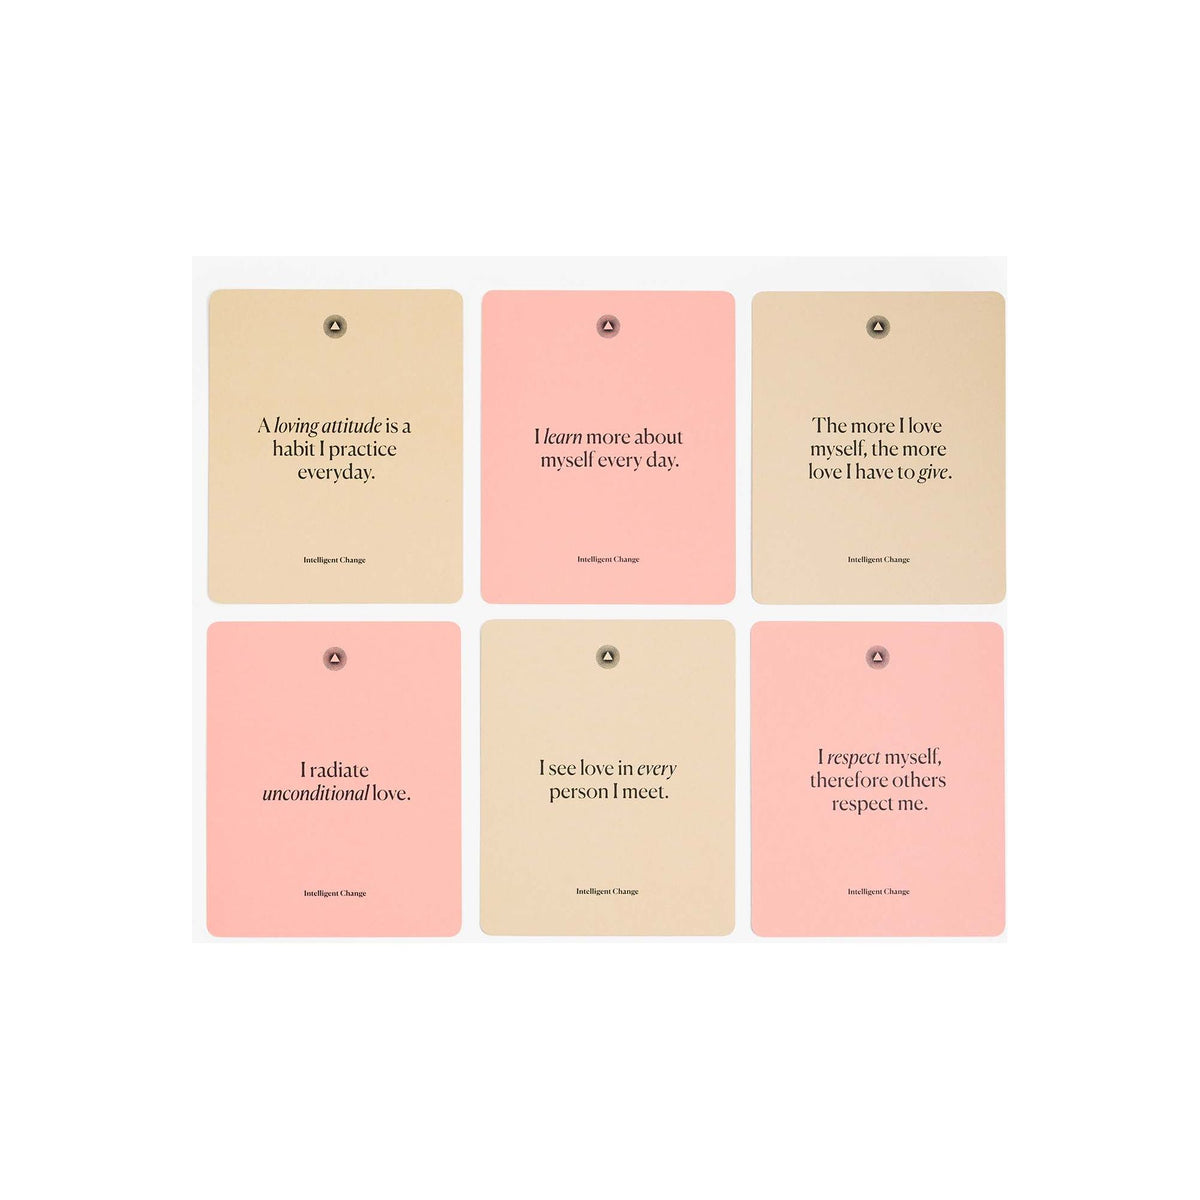 Mindful Affirmations Collection - Five Editions by Intelligent Change